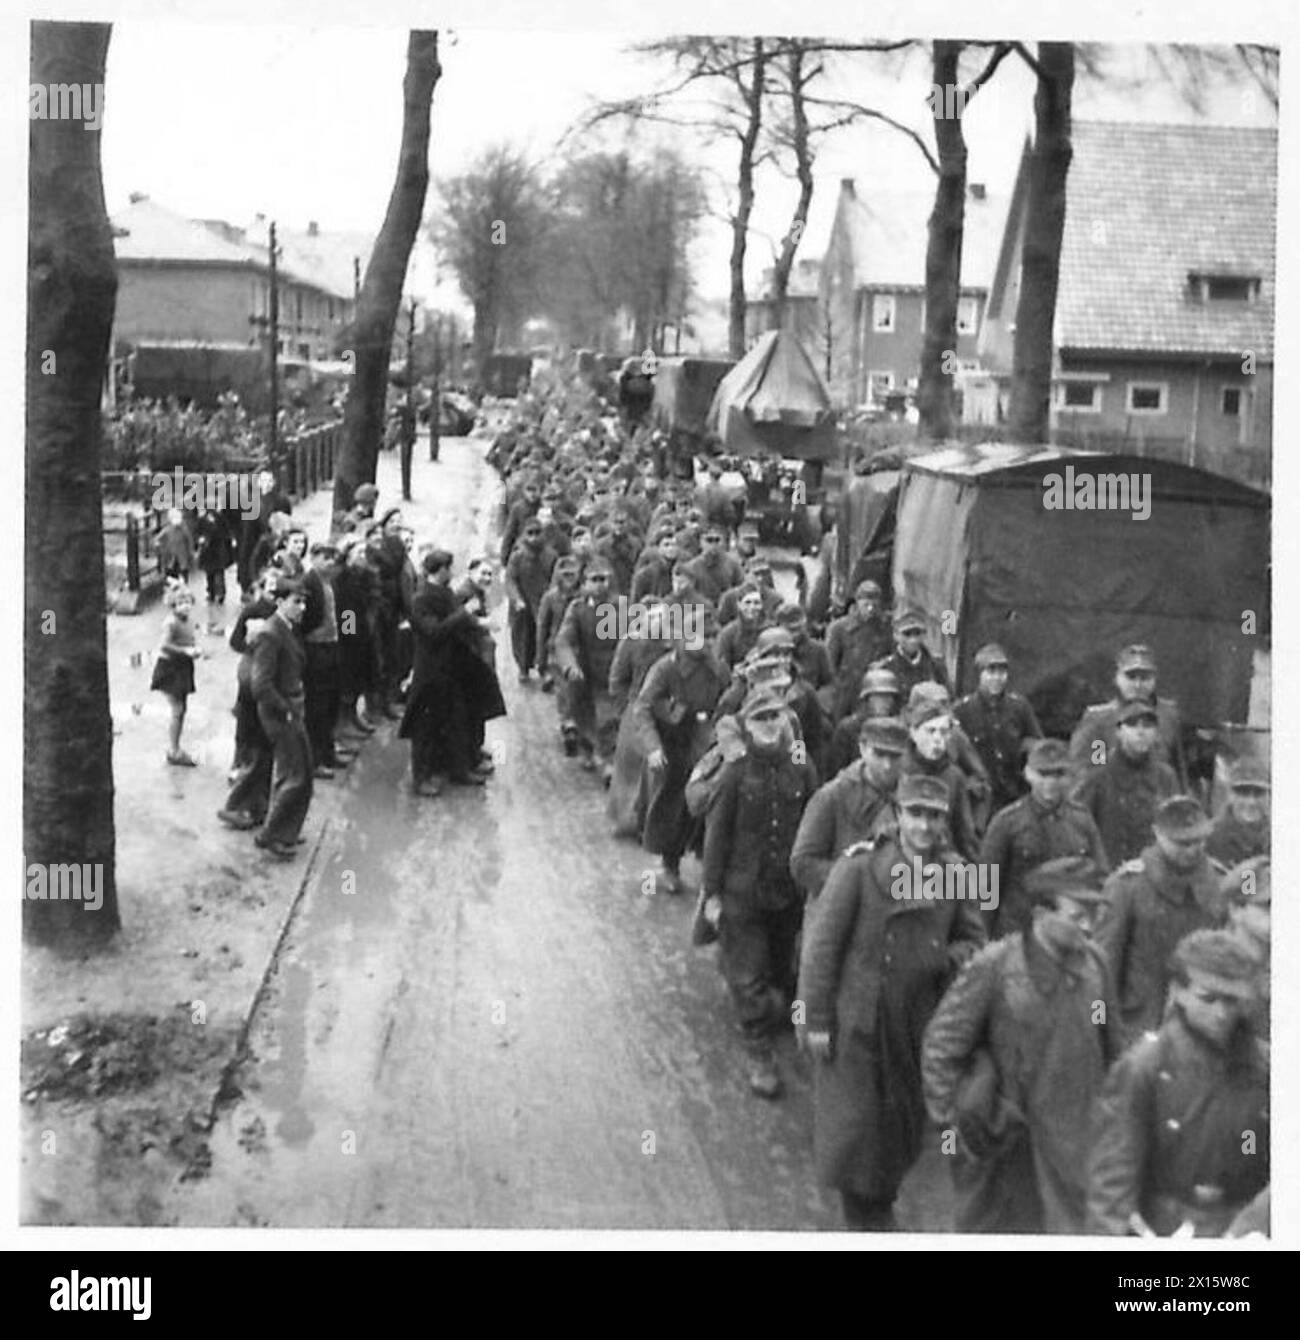 OPERATION VERITABLE CONTINUED THE ALLIED ATTACK THROUGH SIEGFRIED LINE - Some of the 450 German prisoners taken in the Reichwald sector by 53 Div. The picture shews them being marched in and transported to the back areas in Army lorries. They were watched by the Dutch civilians who showed their happiness and delight at the downfall of their recent oppressors. Children were particularly demonstrative British Army, 21st Army Group Stock Photo